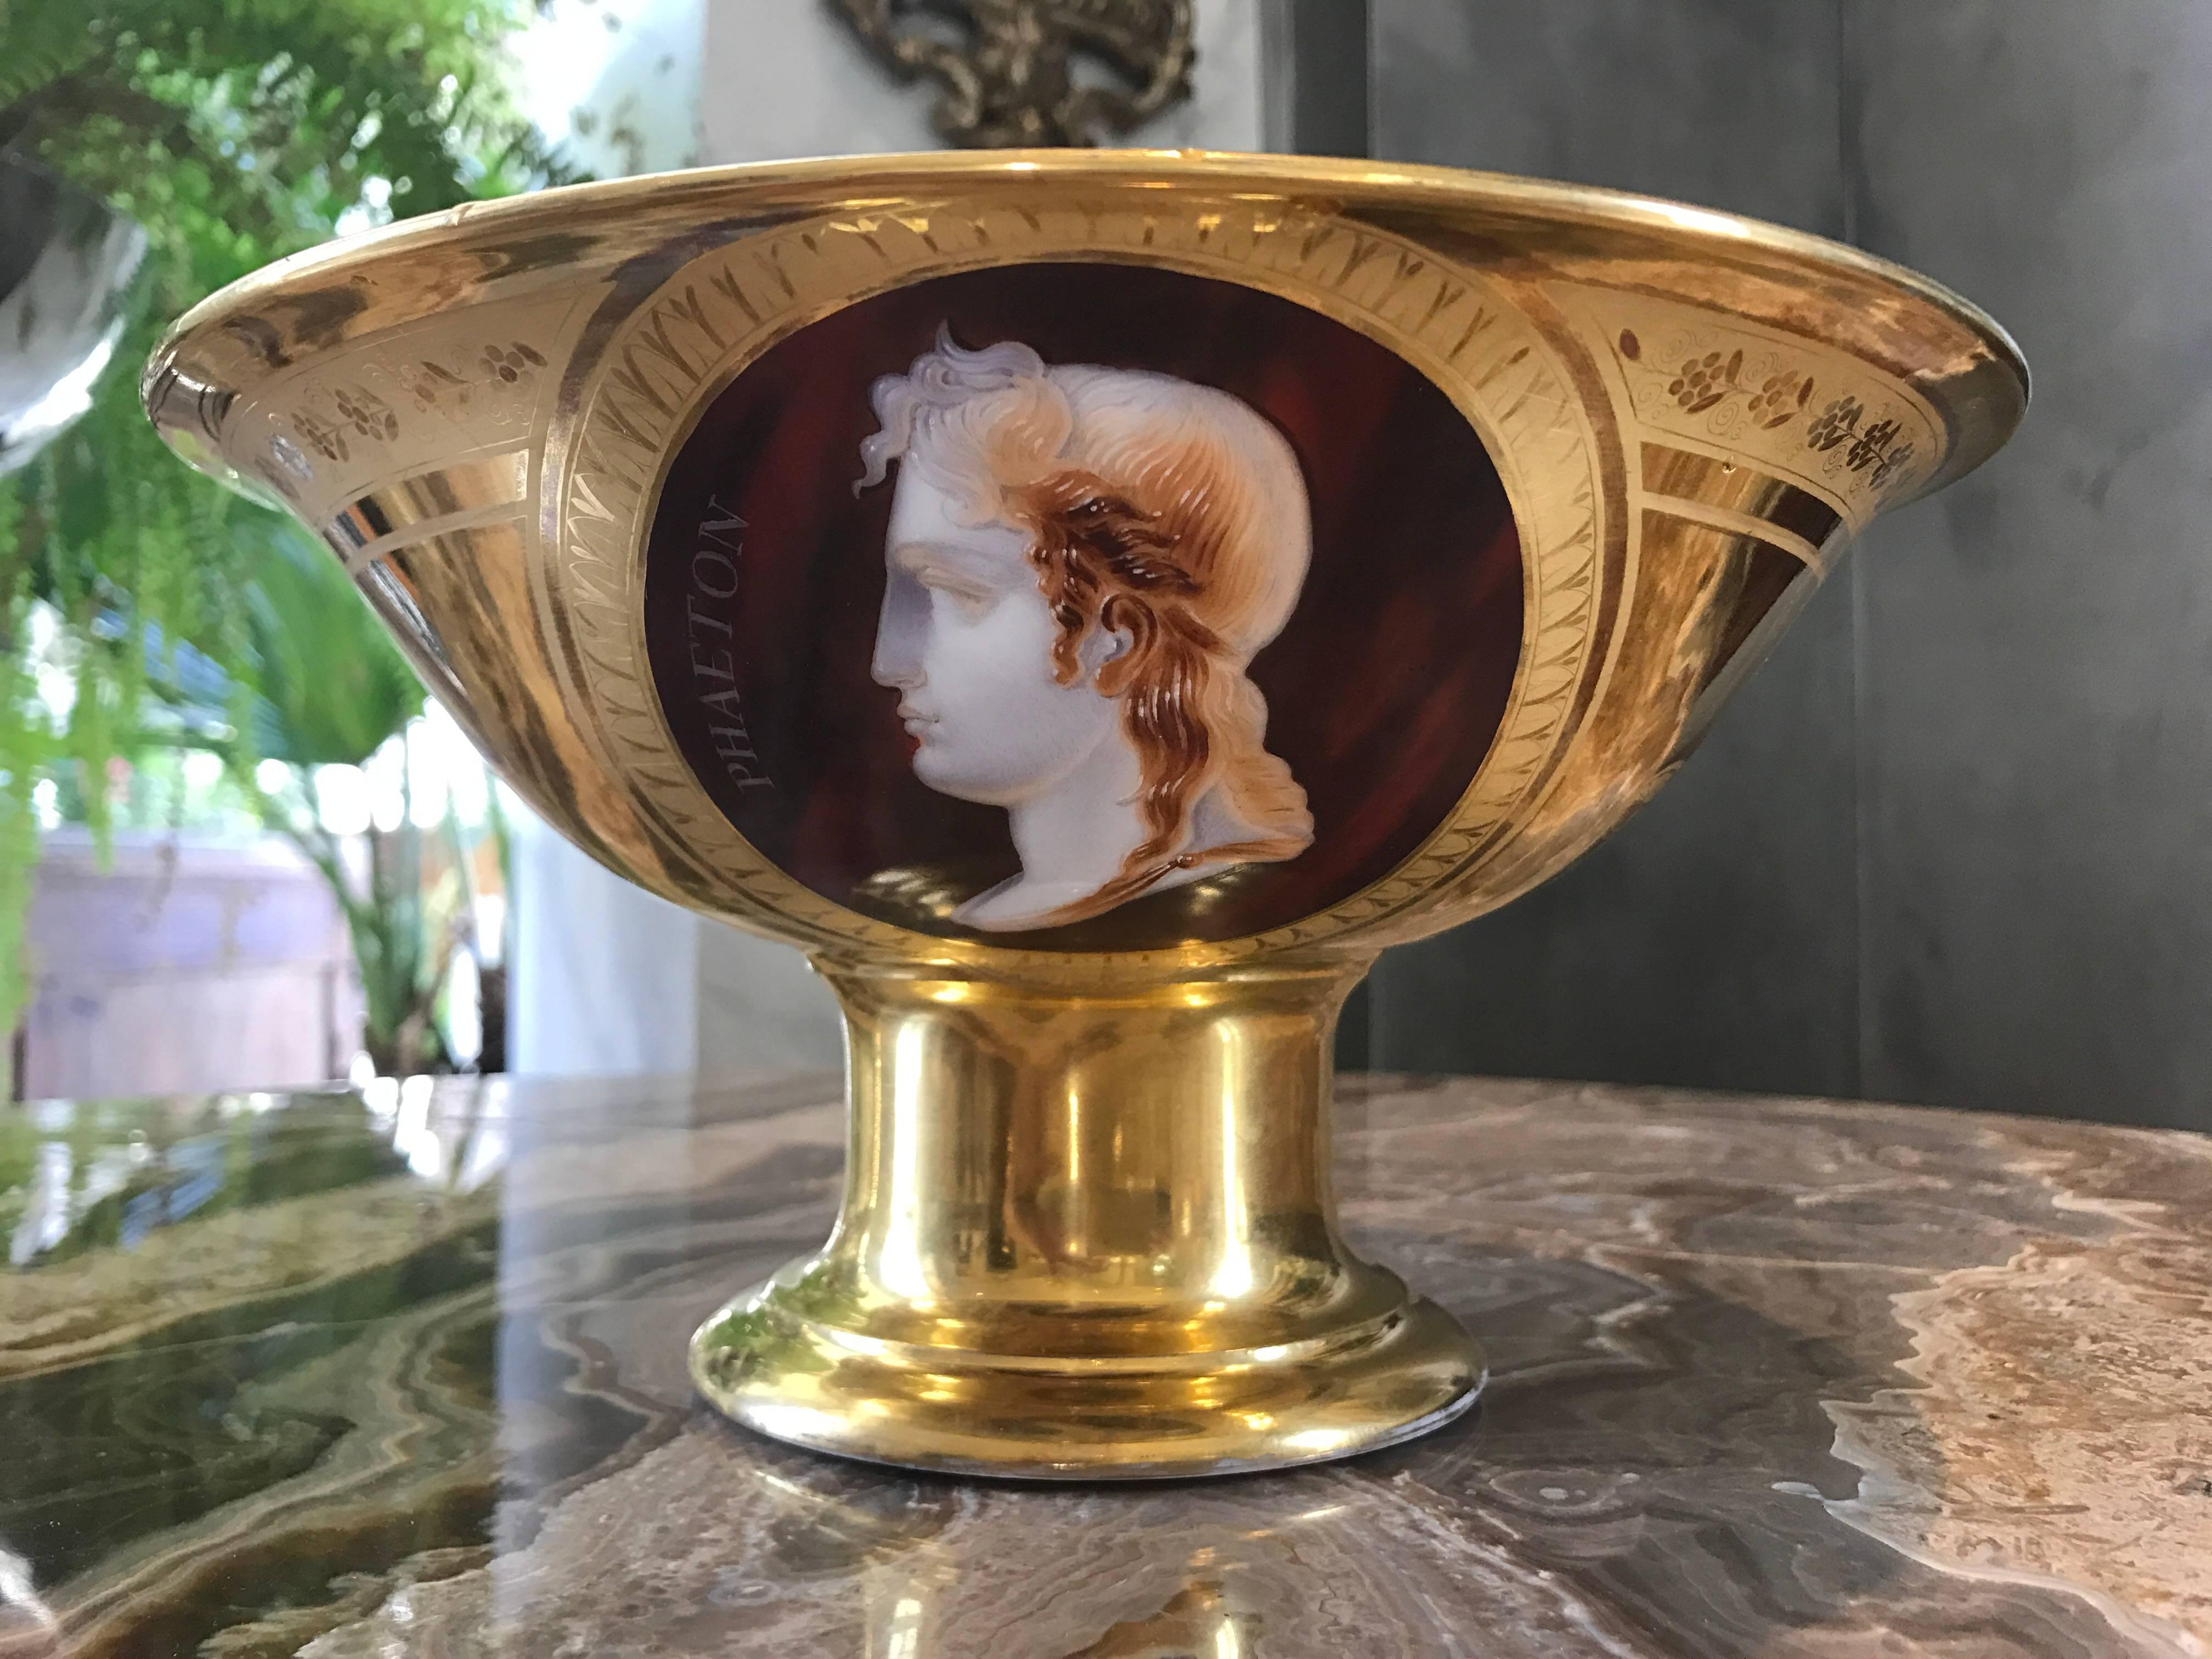 stunning porcelain fruit bowl fit for an Emperor. One side displays in the style of a cameo on a rich burgundy background the handsome Profile of Phaeton, son of Apollo/Helios, the other side the profile of Eagle.
The underside shows orange markings